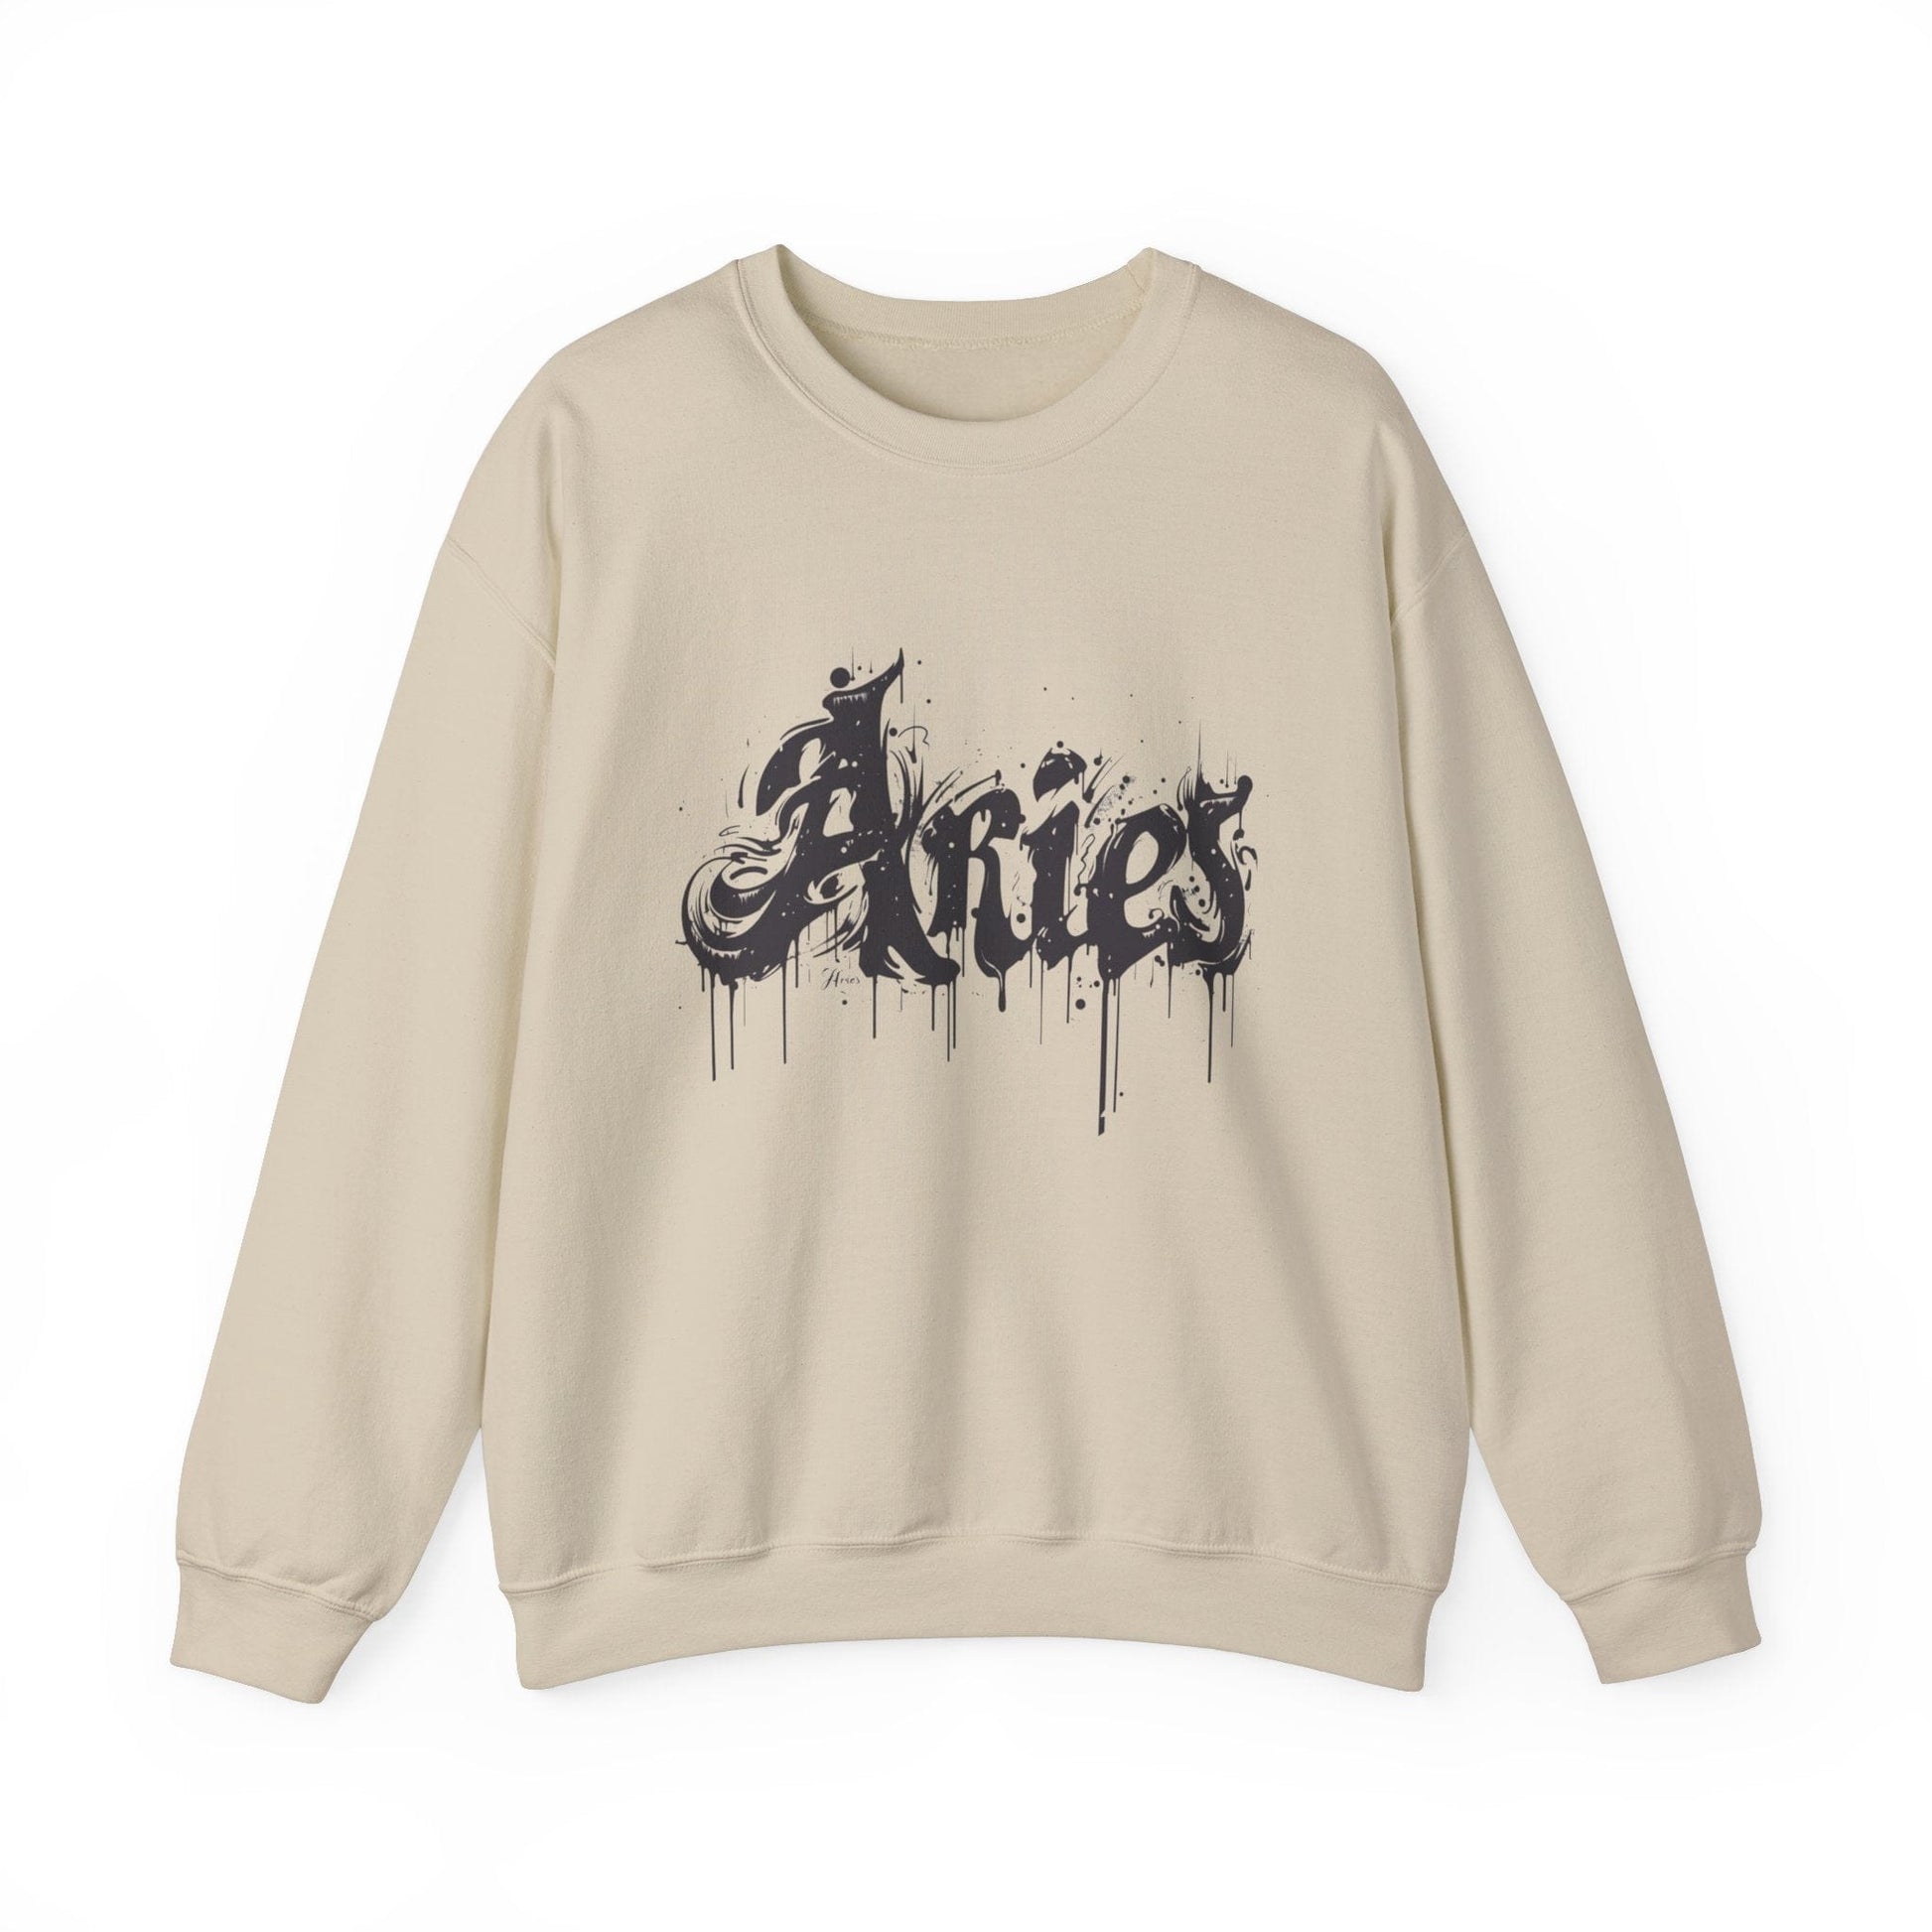 Sweatshirt S / Sand Ink-Dripped Aries Energy Soft Sweater: Embrace Your Fire